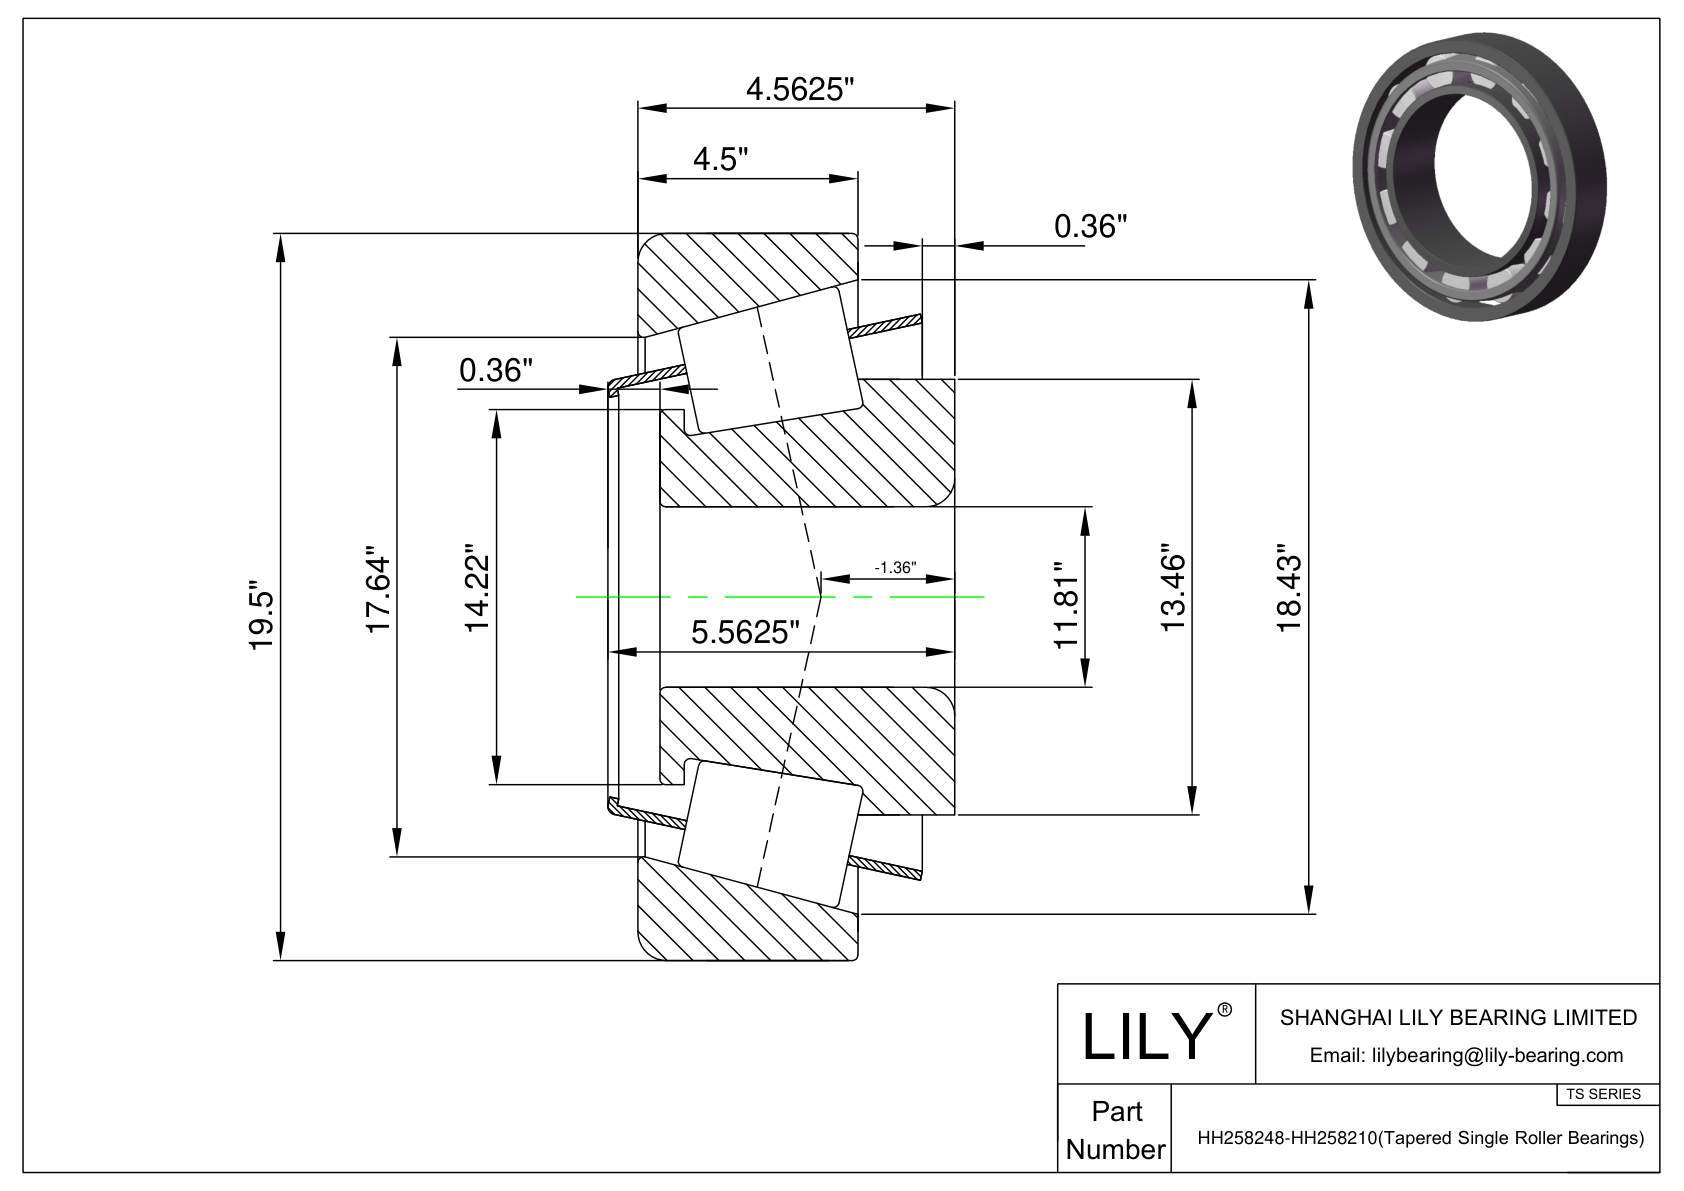 HH258248-HH258210 TS (Tapered Single Roller Bearings) (Imperial) cad drawing